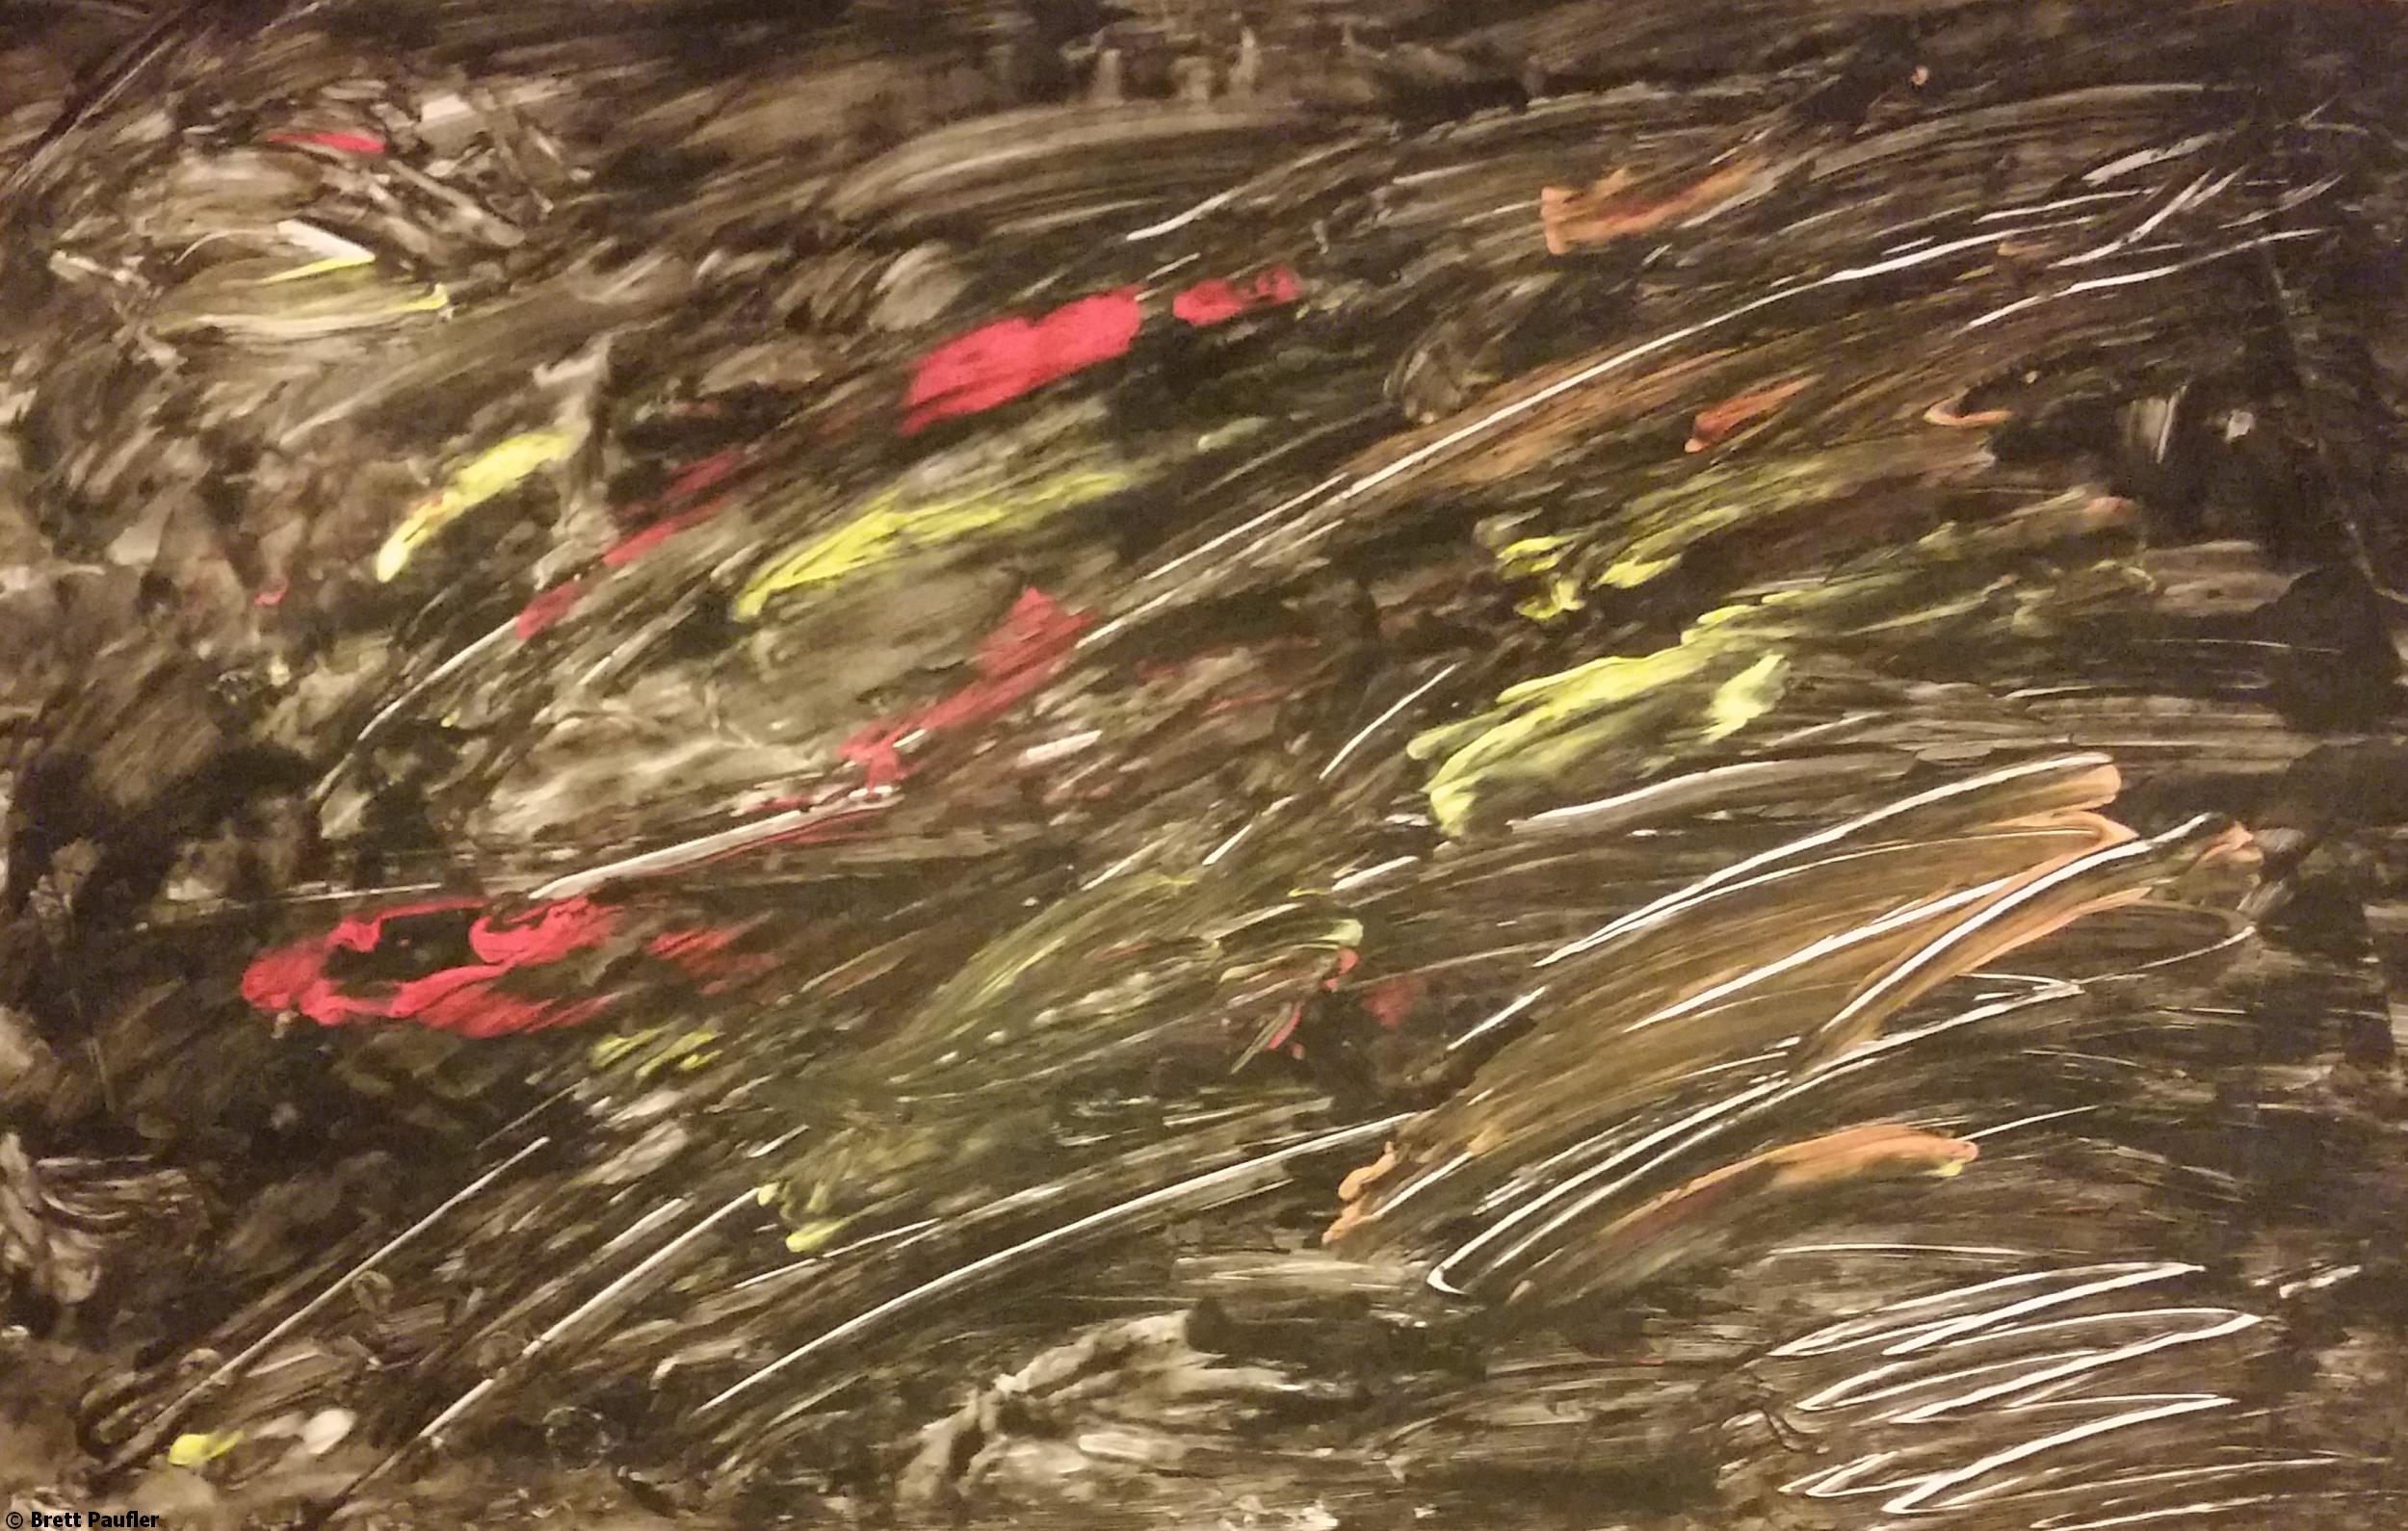 The Title says it all, black abstract with a few other primary colors mixed in